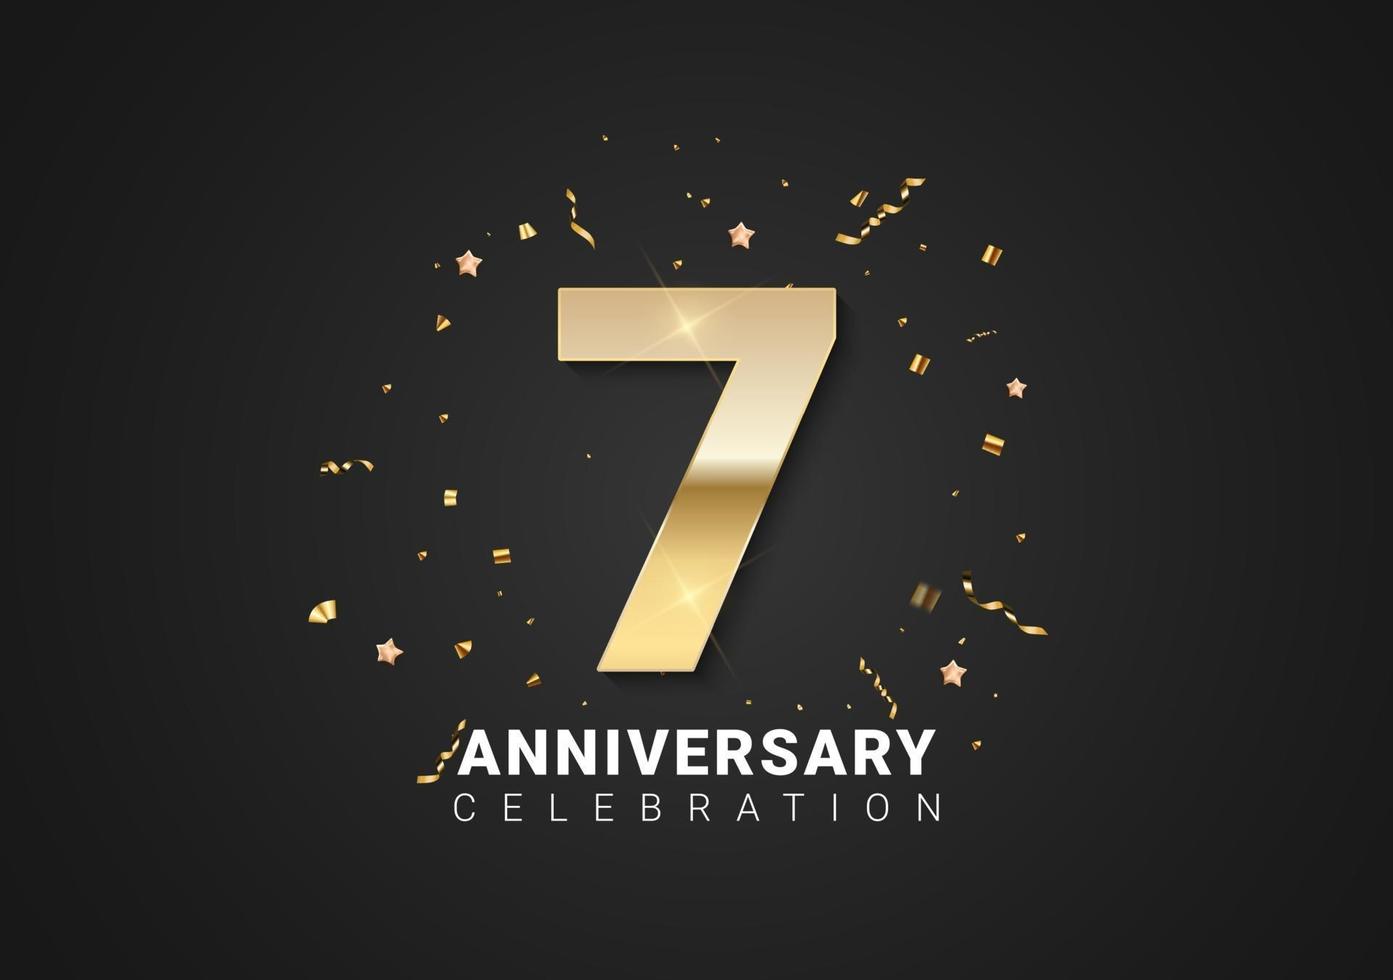 7 anniversary background with golden numbers, confetti, stars vector